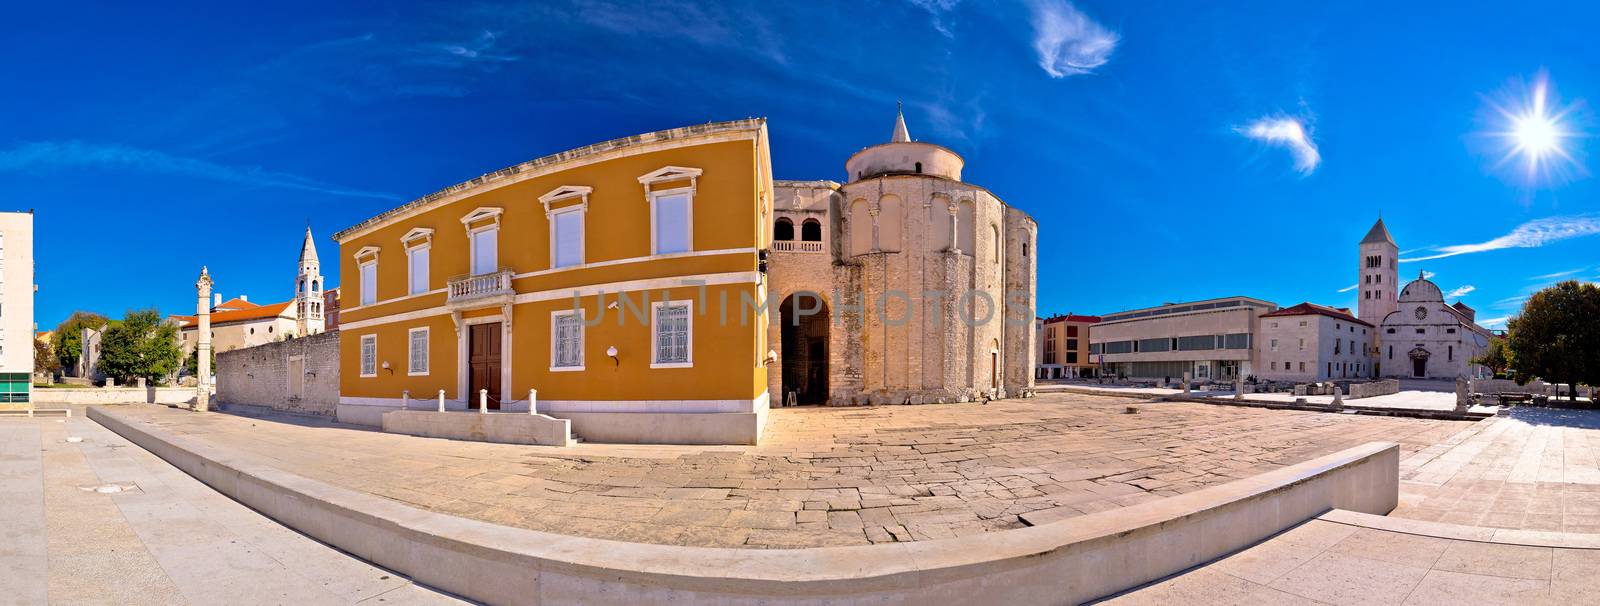 Zadar historic square panoramic view by xbrchx